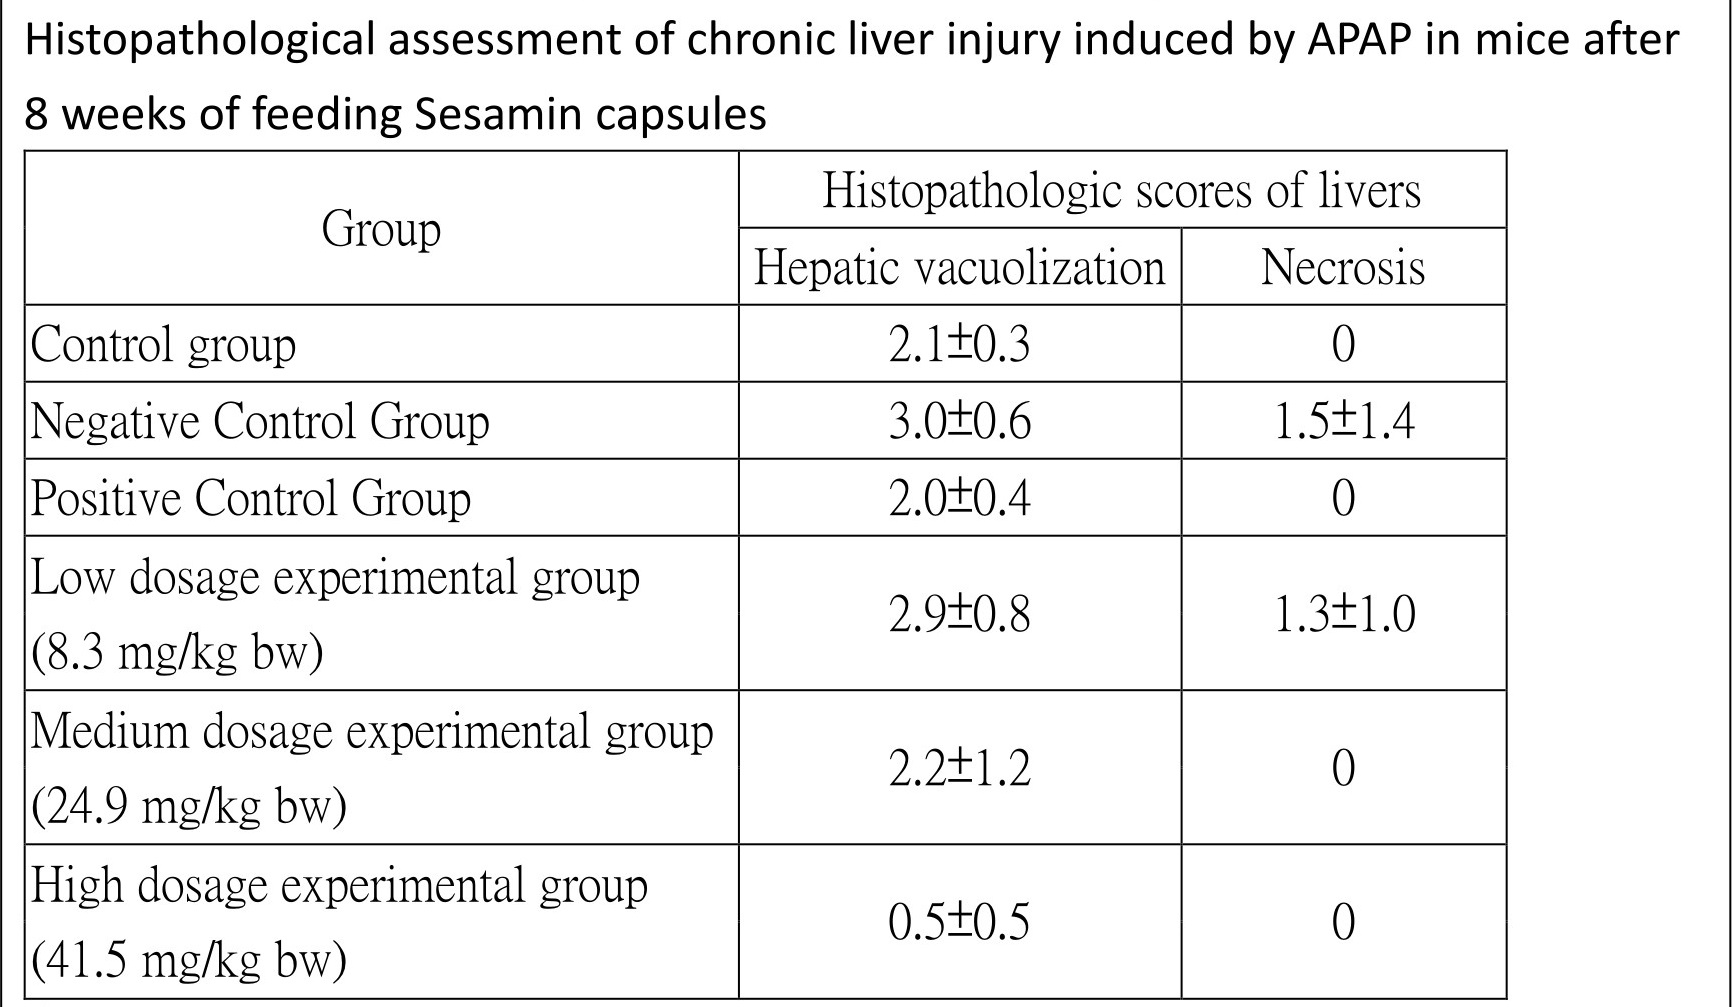 Histopathological assessment of chronic liver injury induced by APAP in mice after 8 weeks of feeding sesamin capsules.